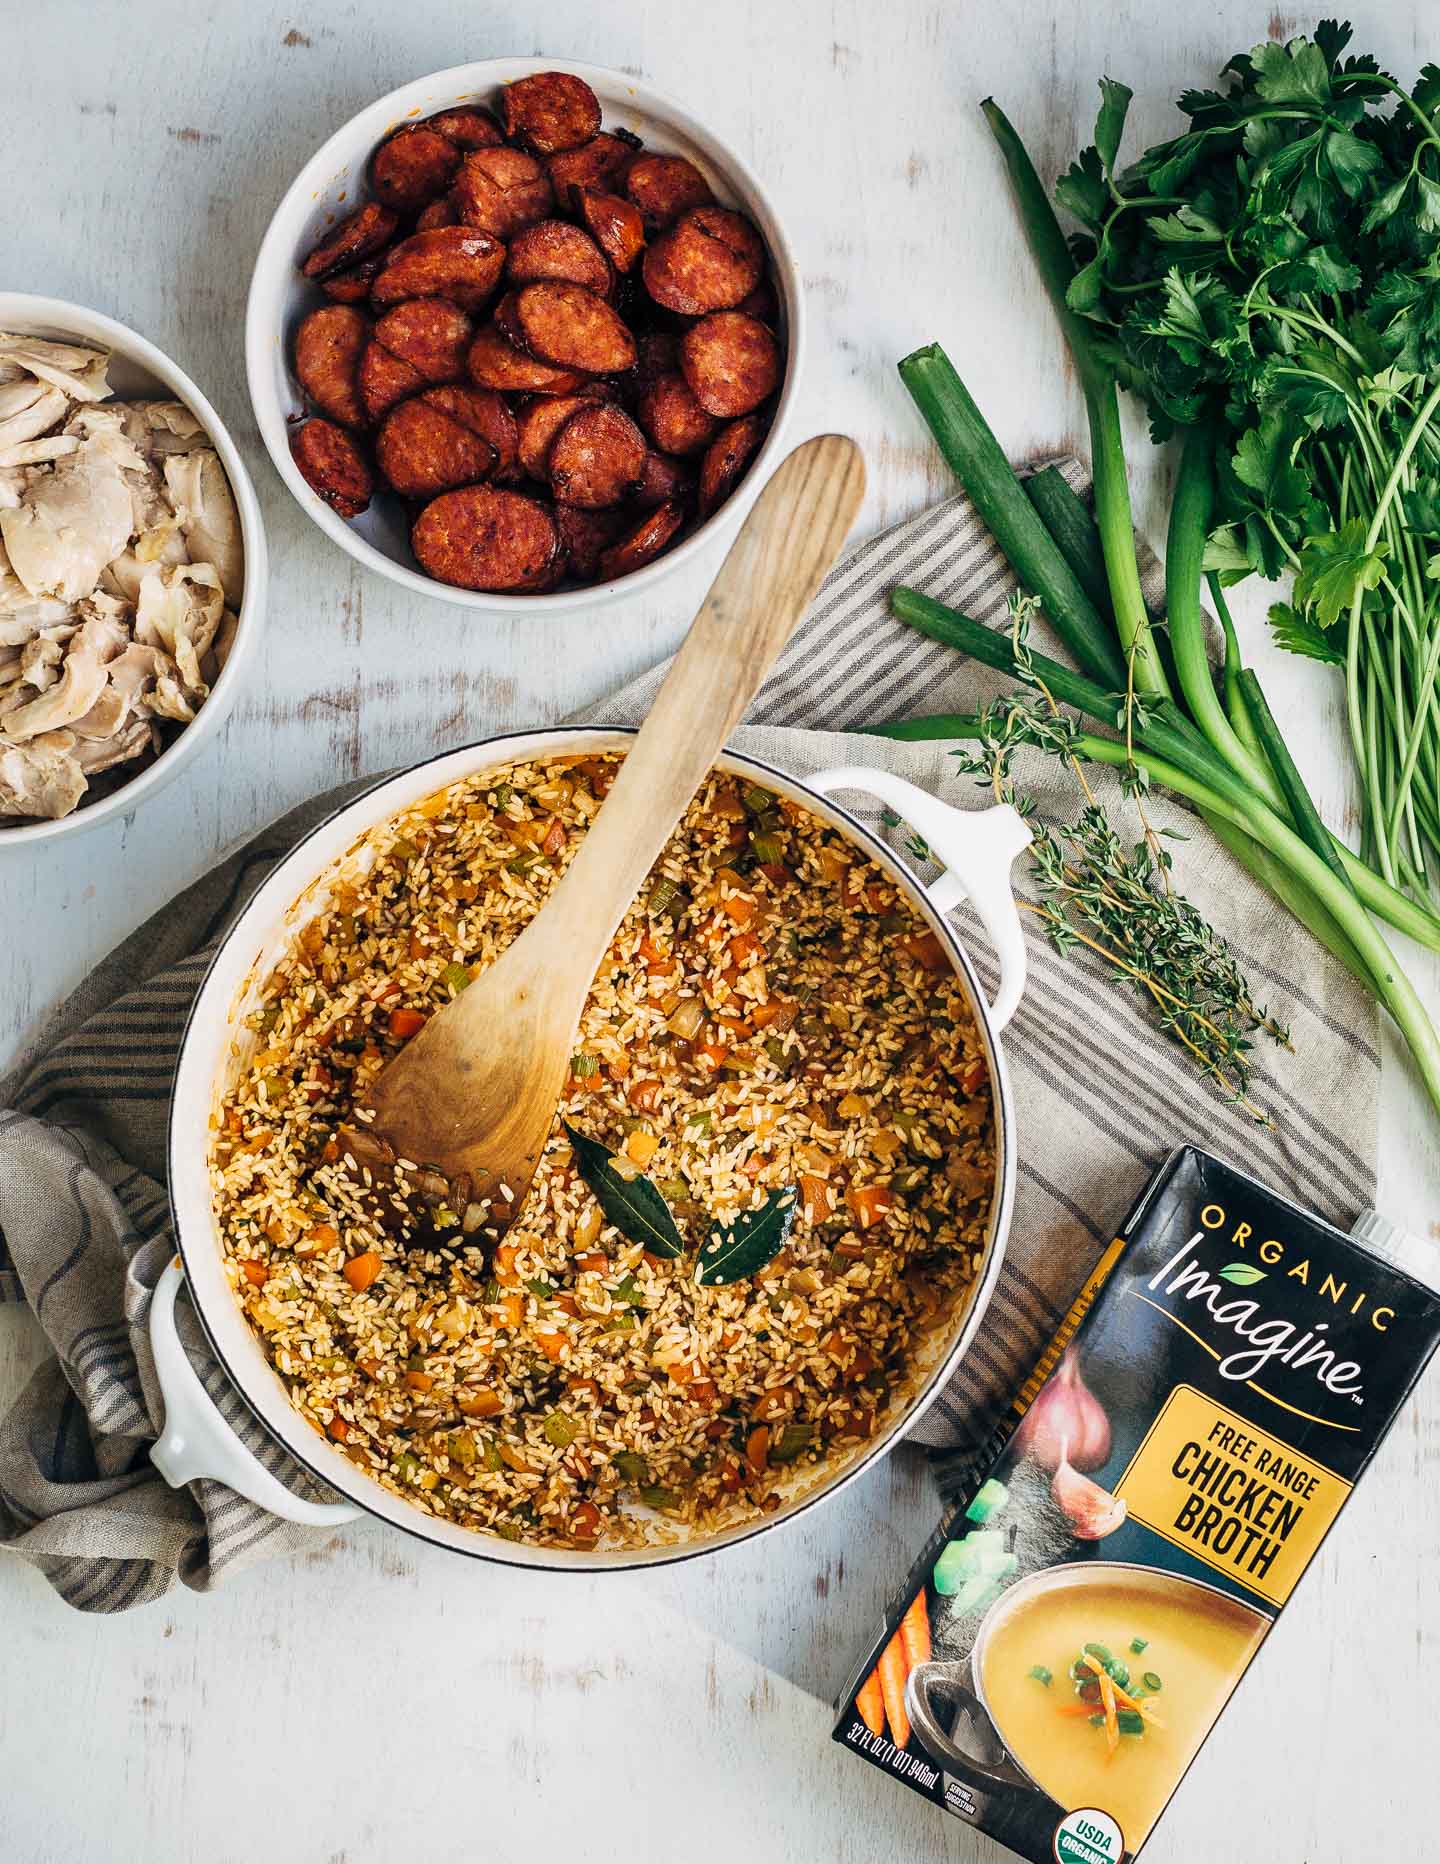 A spin on classic chicken and rice, this flavorful chicken bog is made with roasted dark meat chicken, smoked sausage, and rich chicken broth tossed with Carolina Gold rice and tender vegetables.